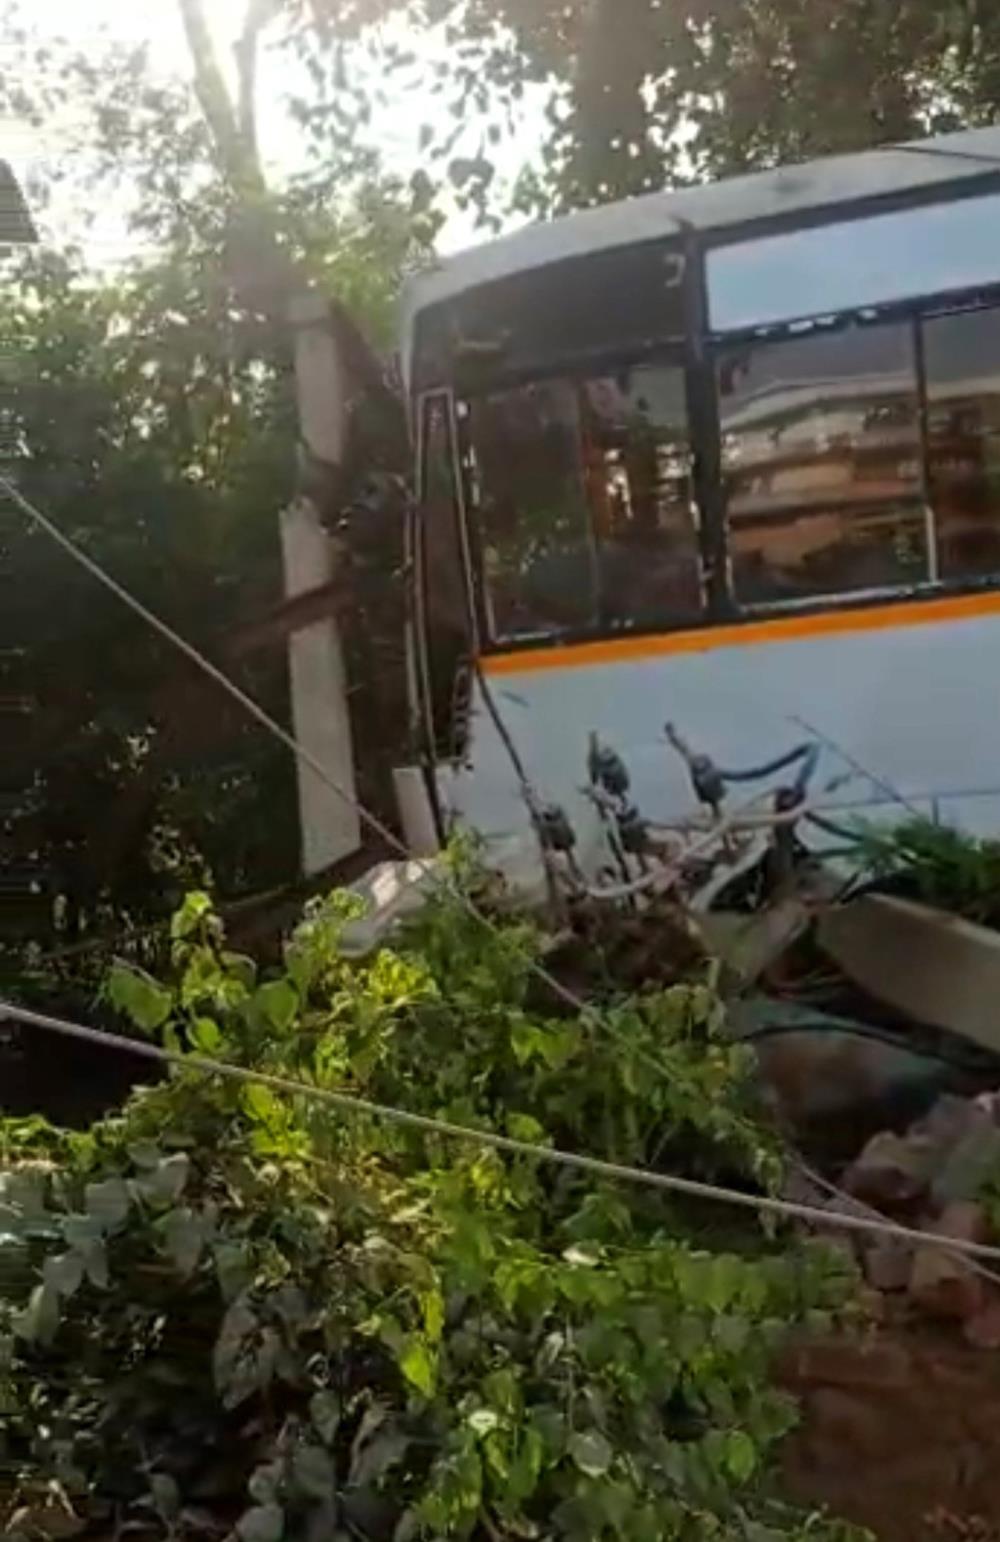 Abohar: Transformer hit by bus, power supply affected